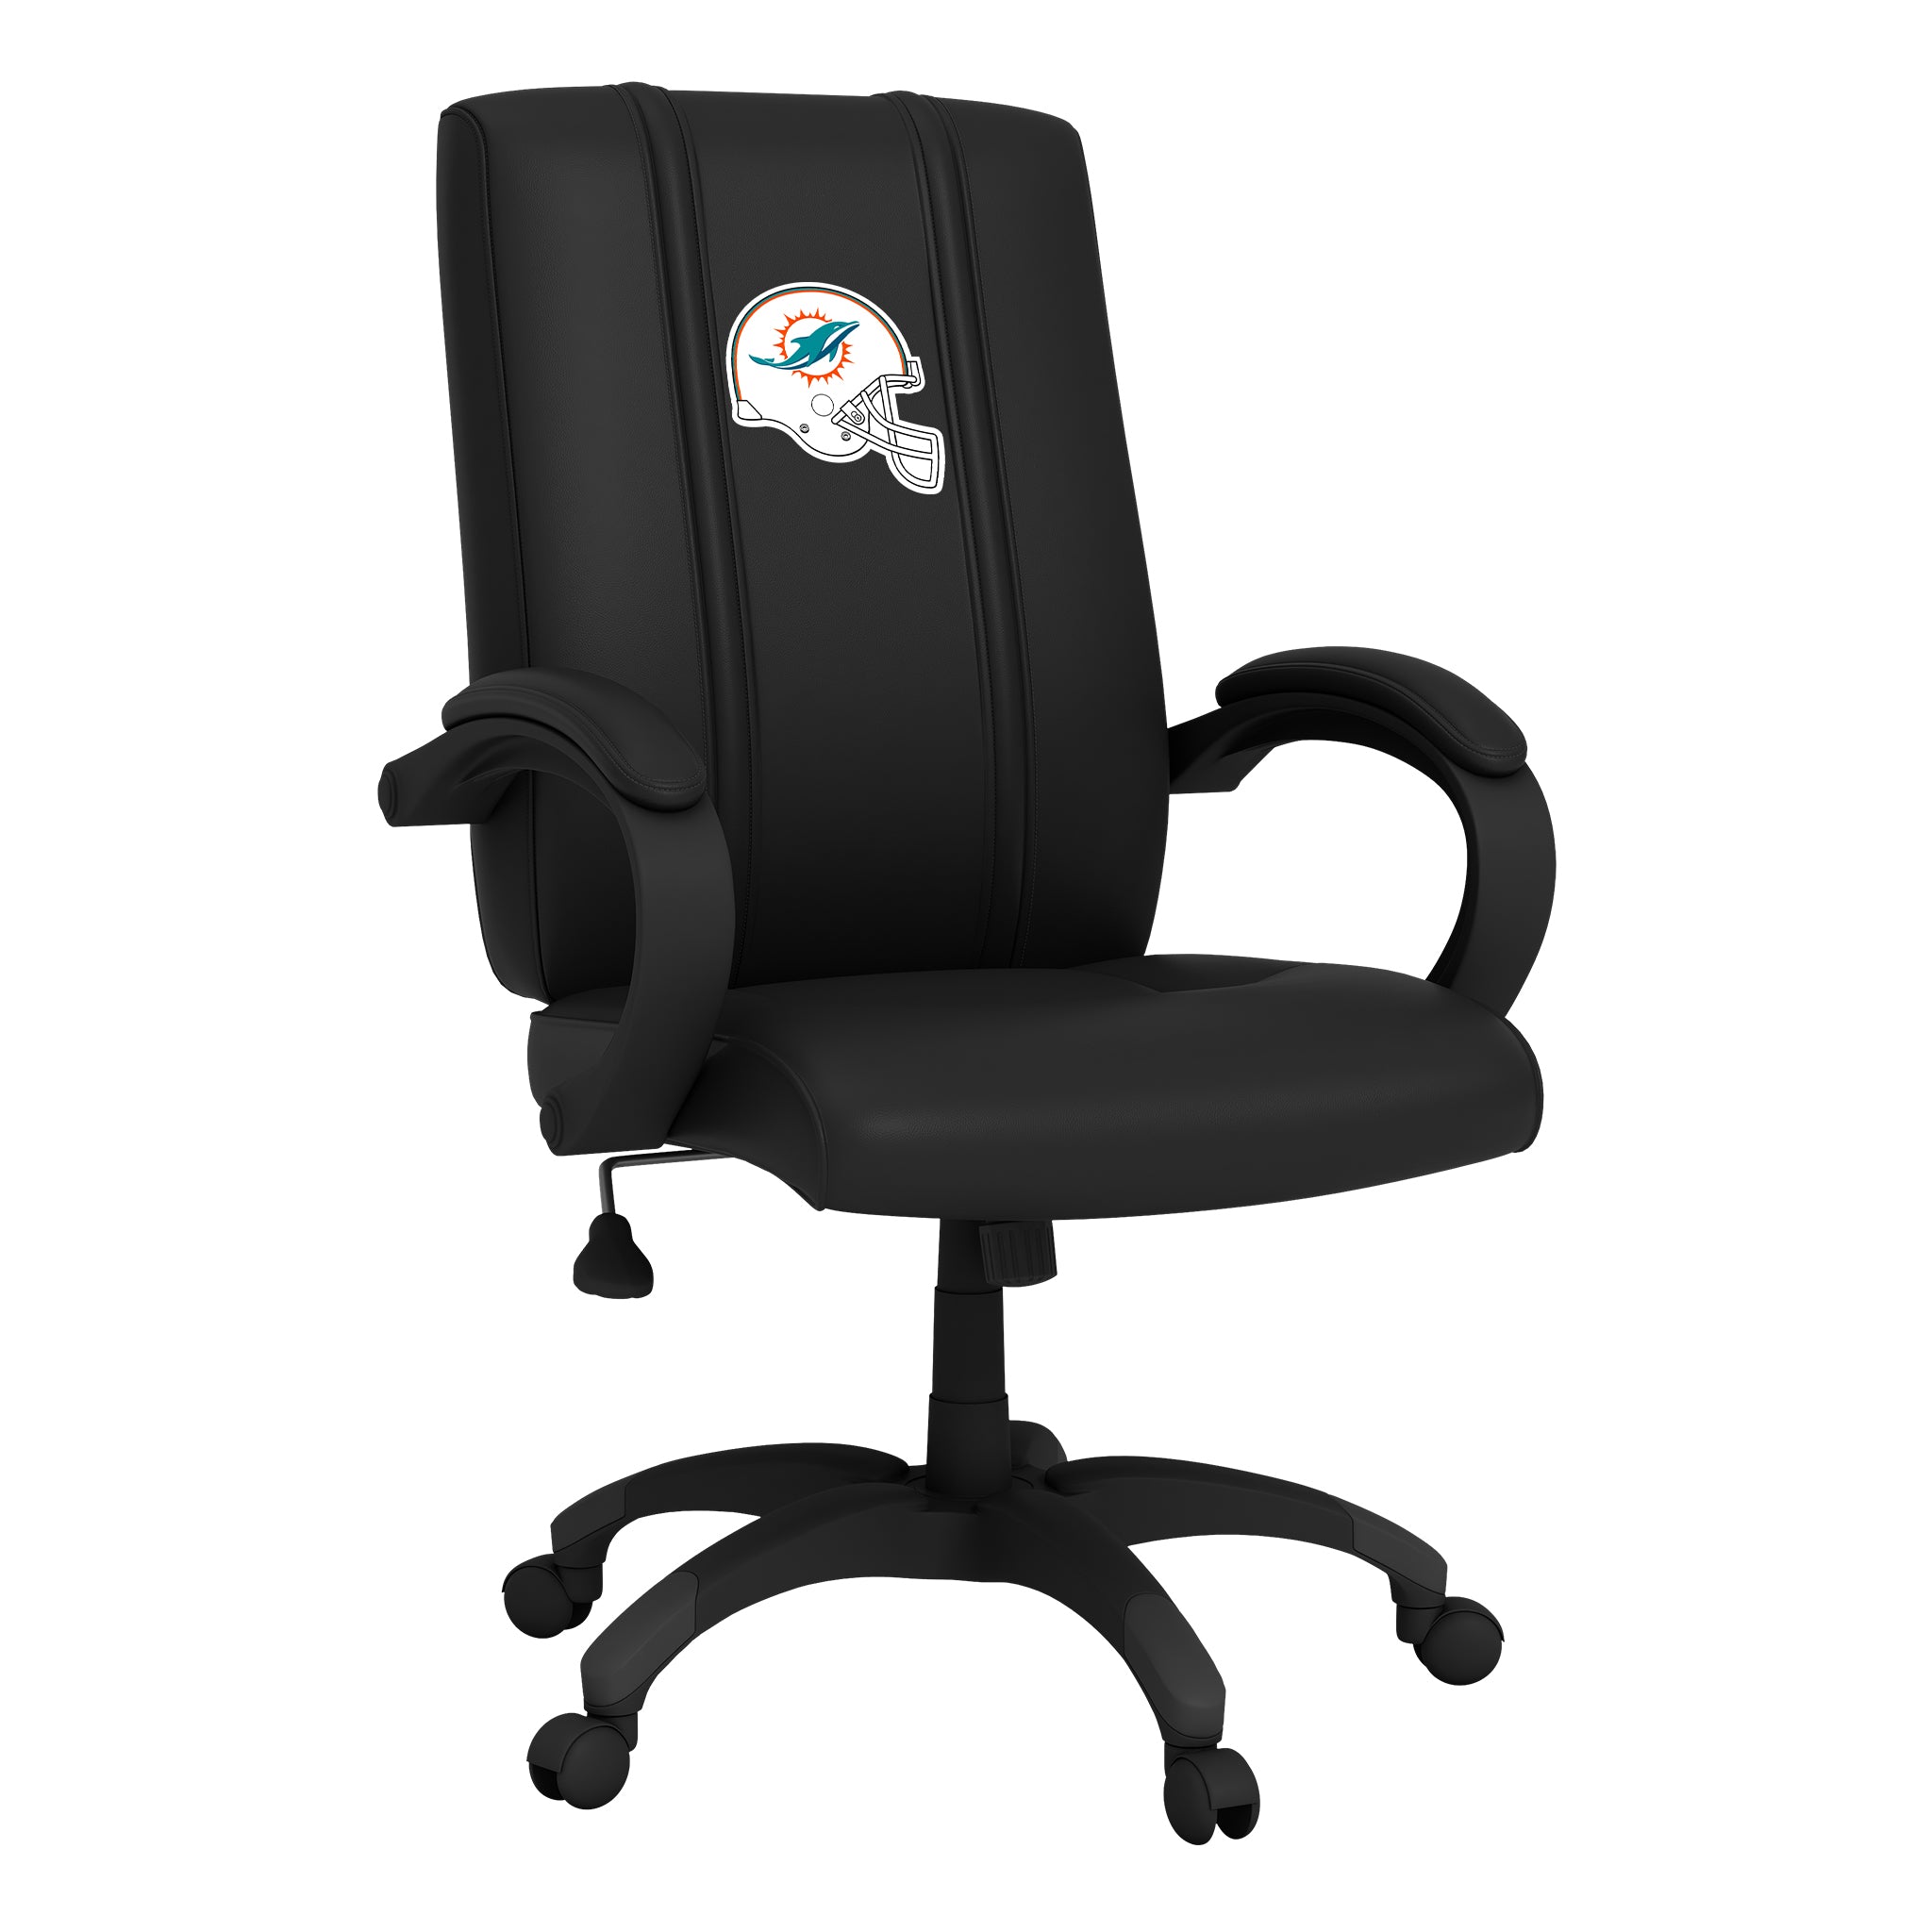 Miami Dolphins Office Chair 1000